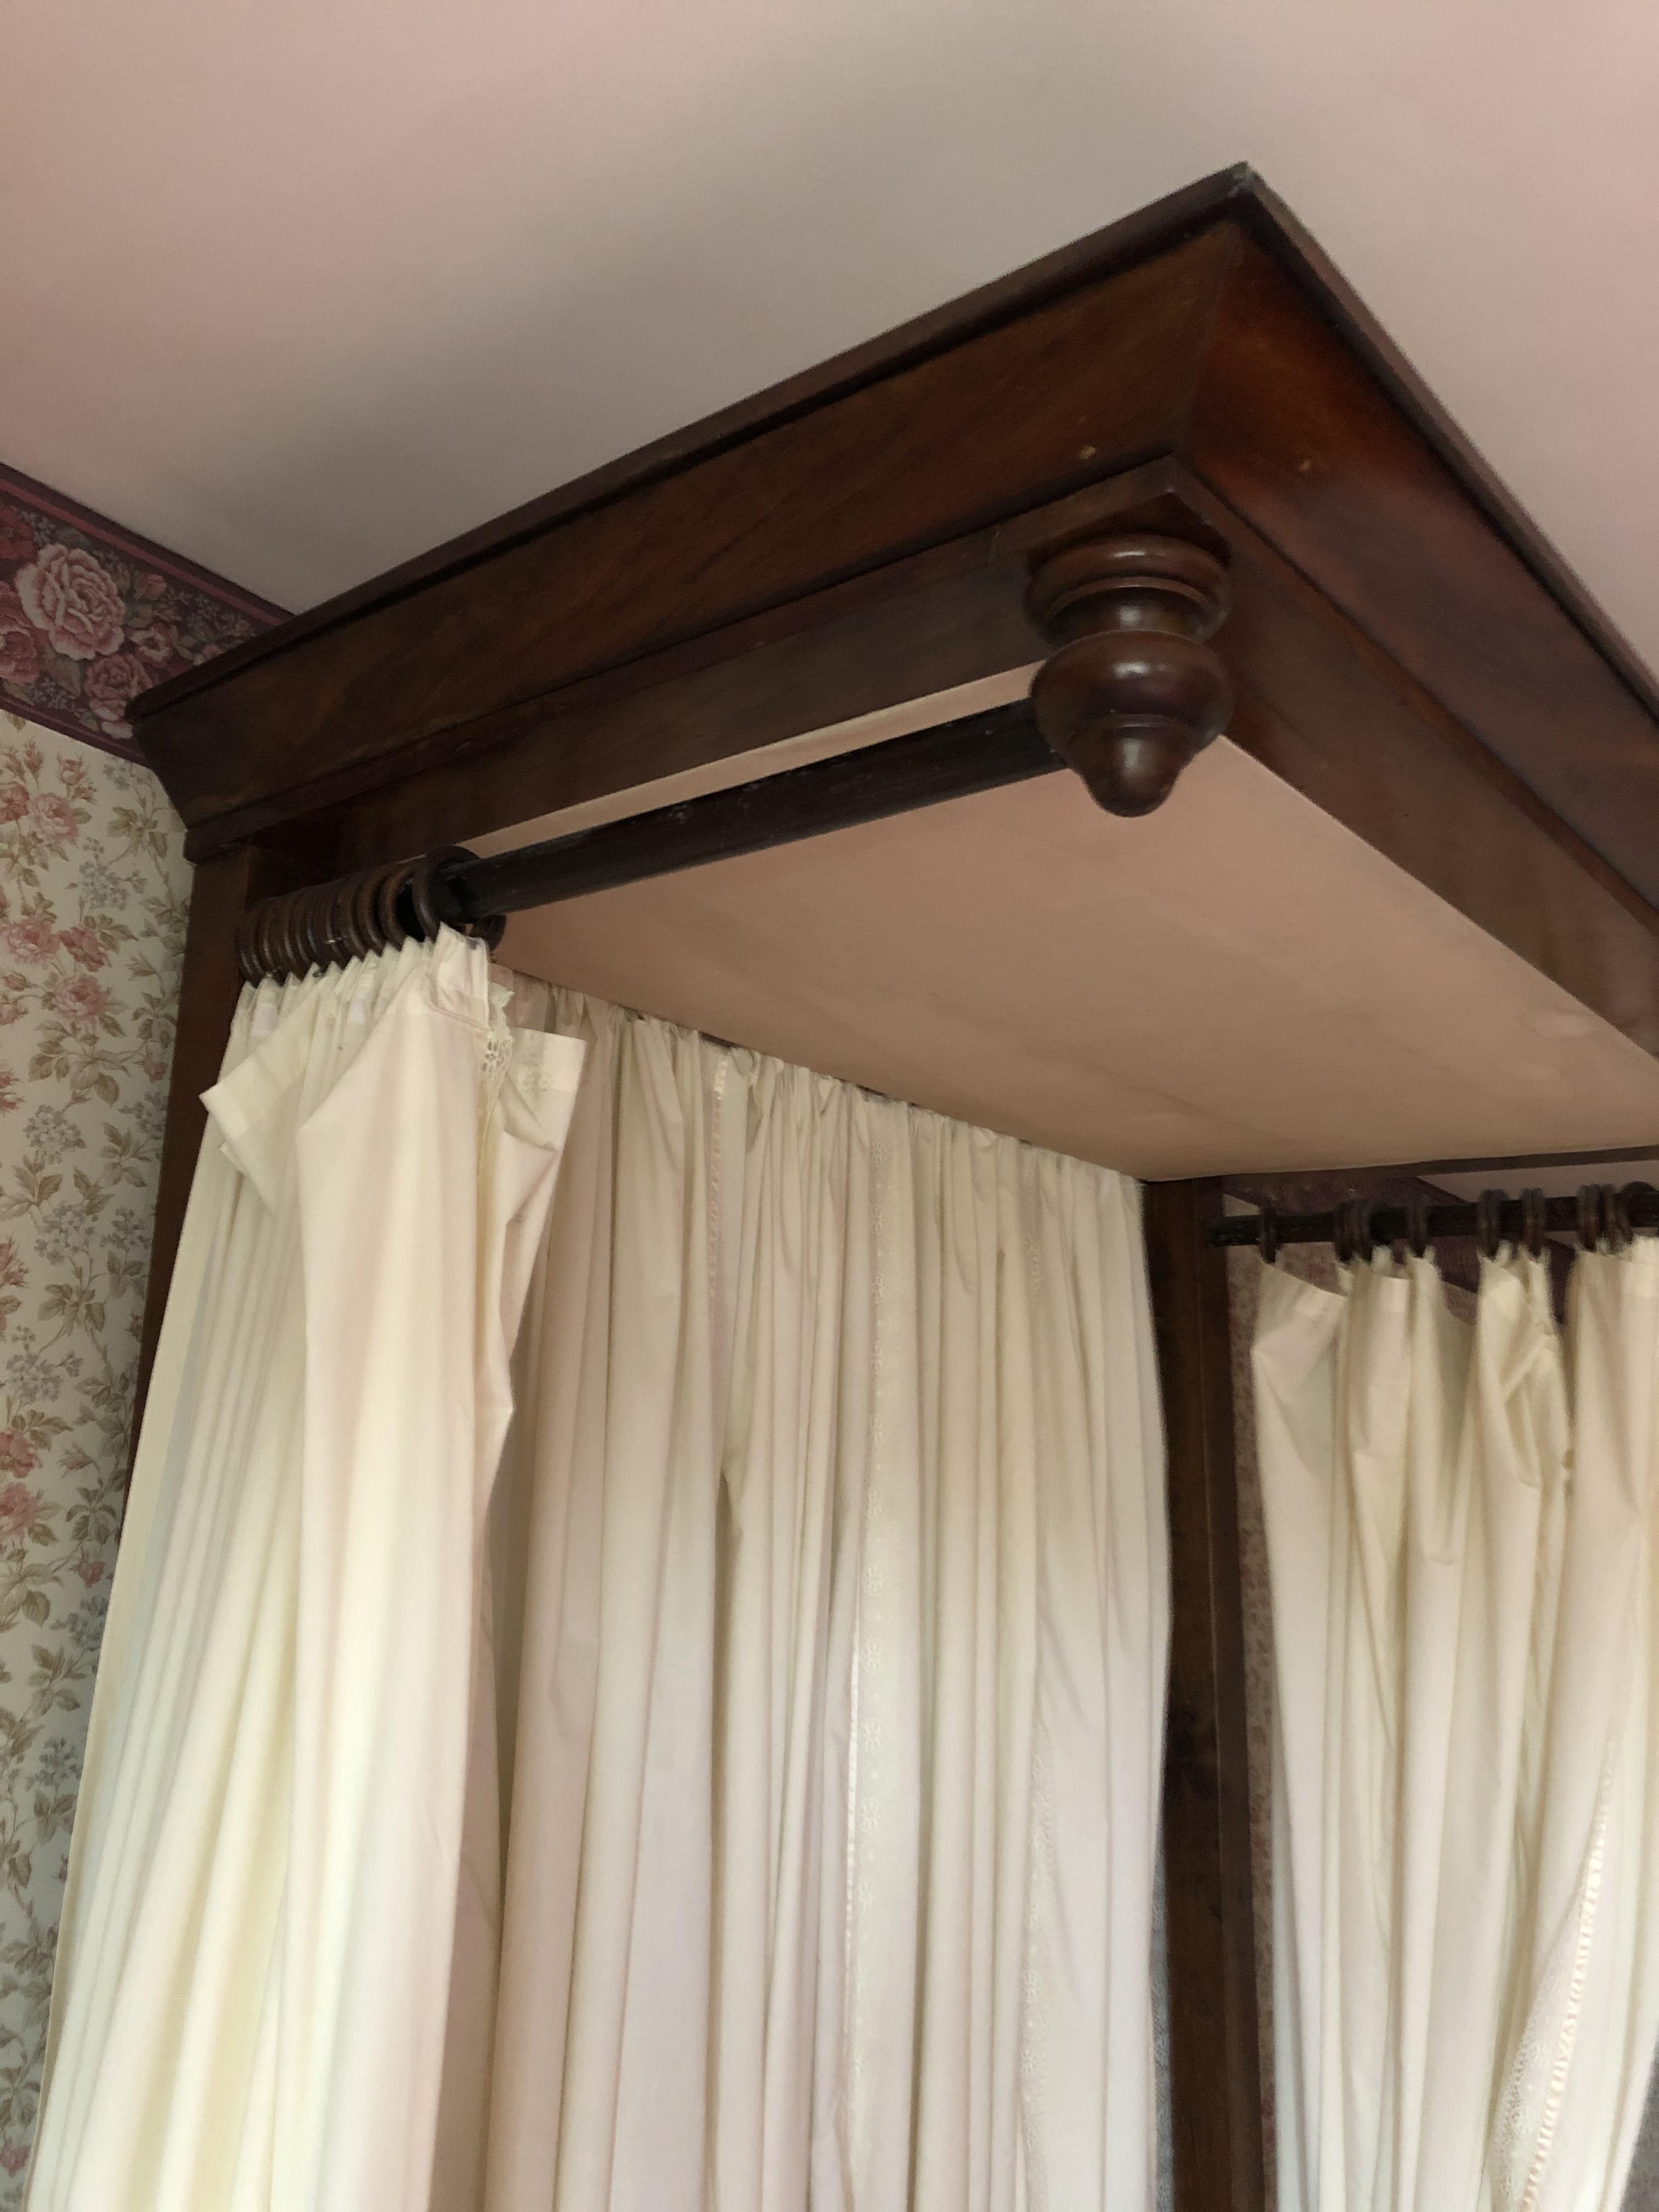 VICTORIAN FLAME MAHOGANY HALF TESTER BEDSTEAD AND MATTRESS - Image 3 of 5